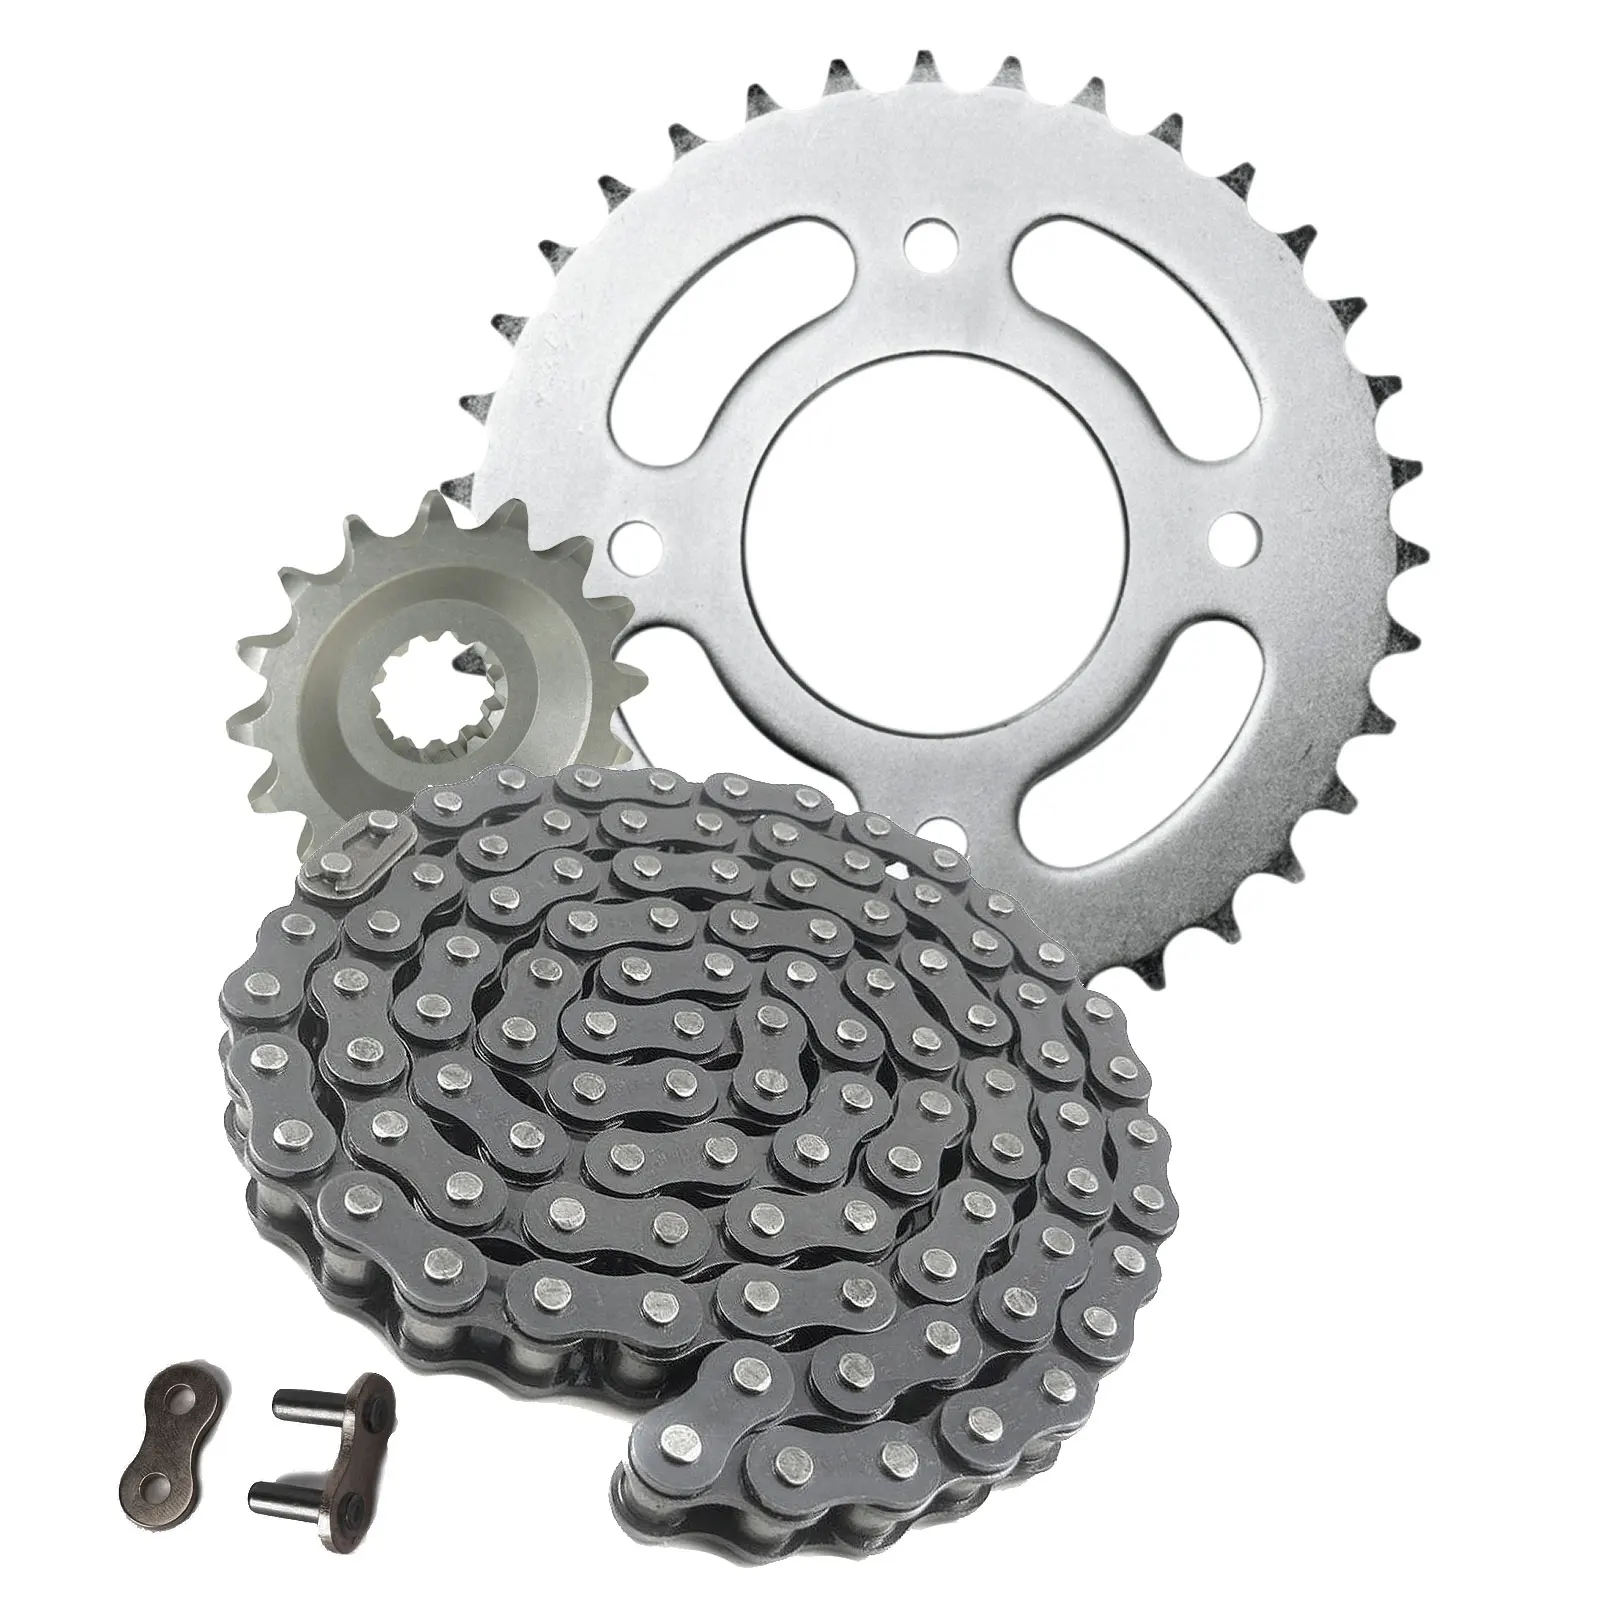 High Quality Offroad O Ring 520h 520 120 Links Chain Motorcycle Sprockets Sets For YZF YZ WRF YZF450